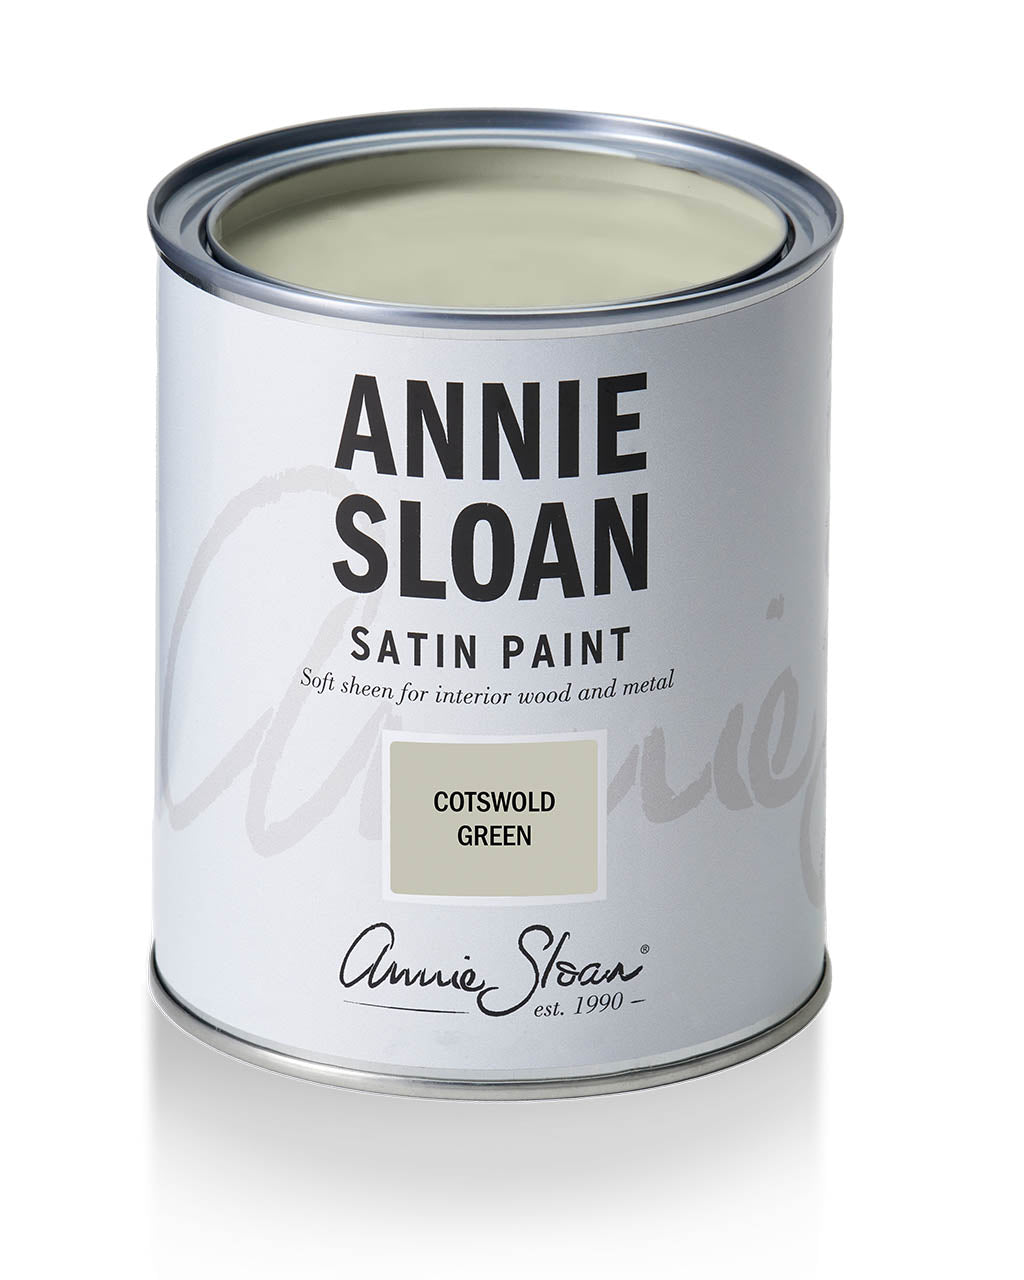 Annie Sloan Satin Paint, Cotswold Green 750 ml